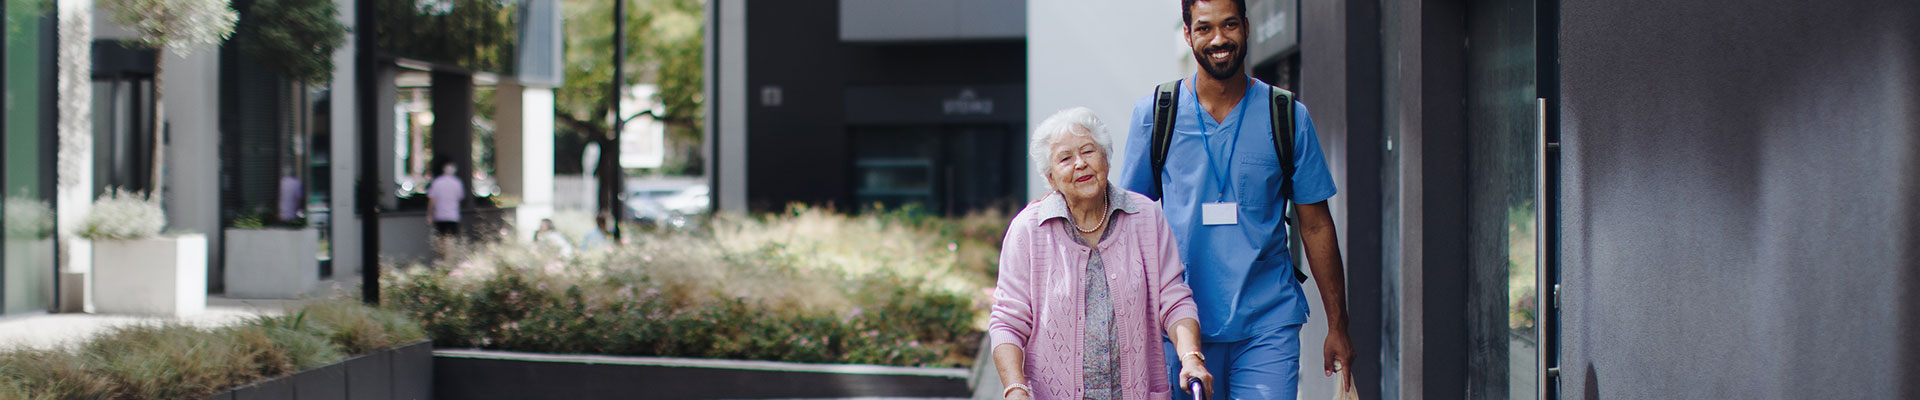 Caregiver and client on a walk